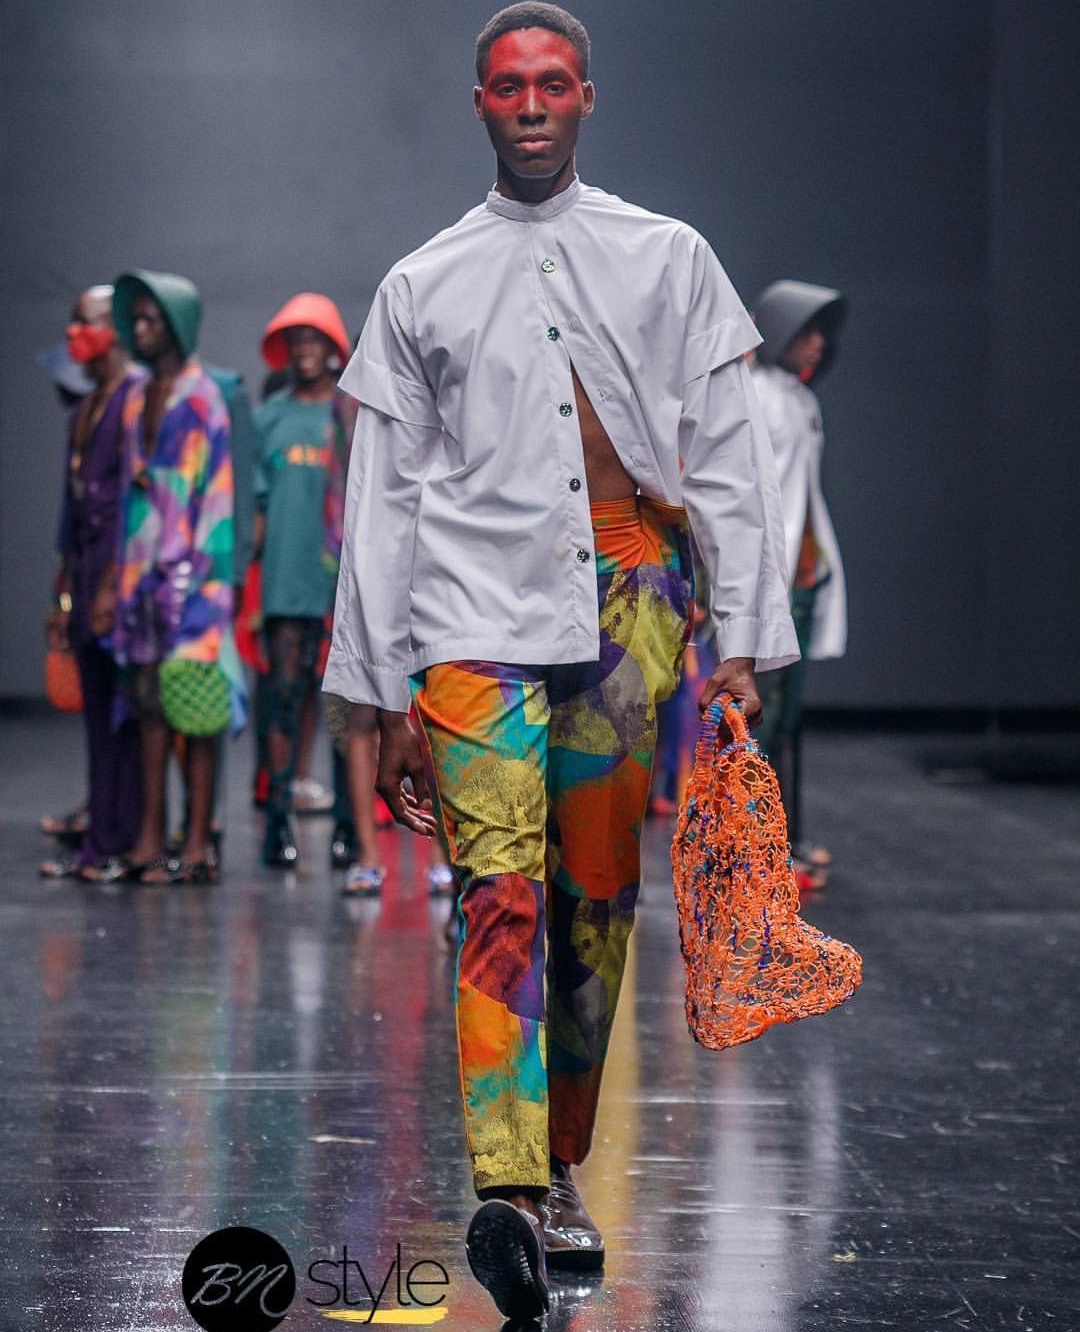 My First Time At Lagos Fashion Week - Here Are the Highlights | BN Style